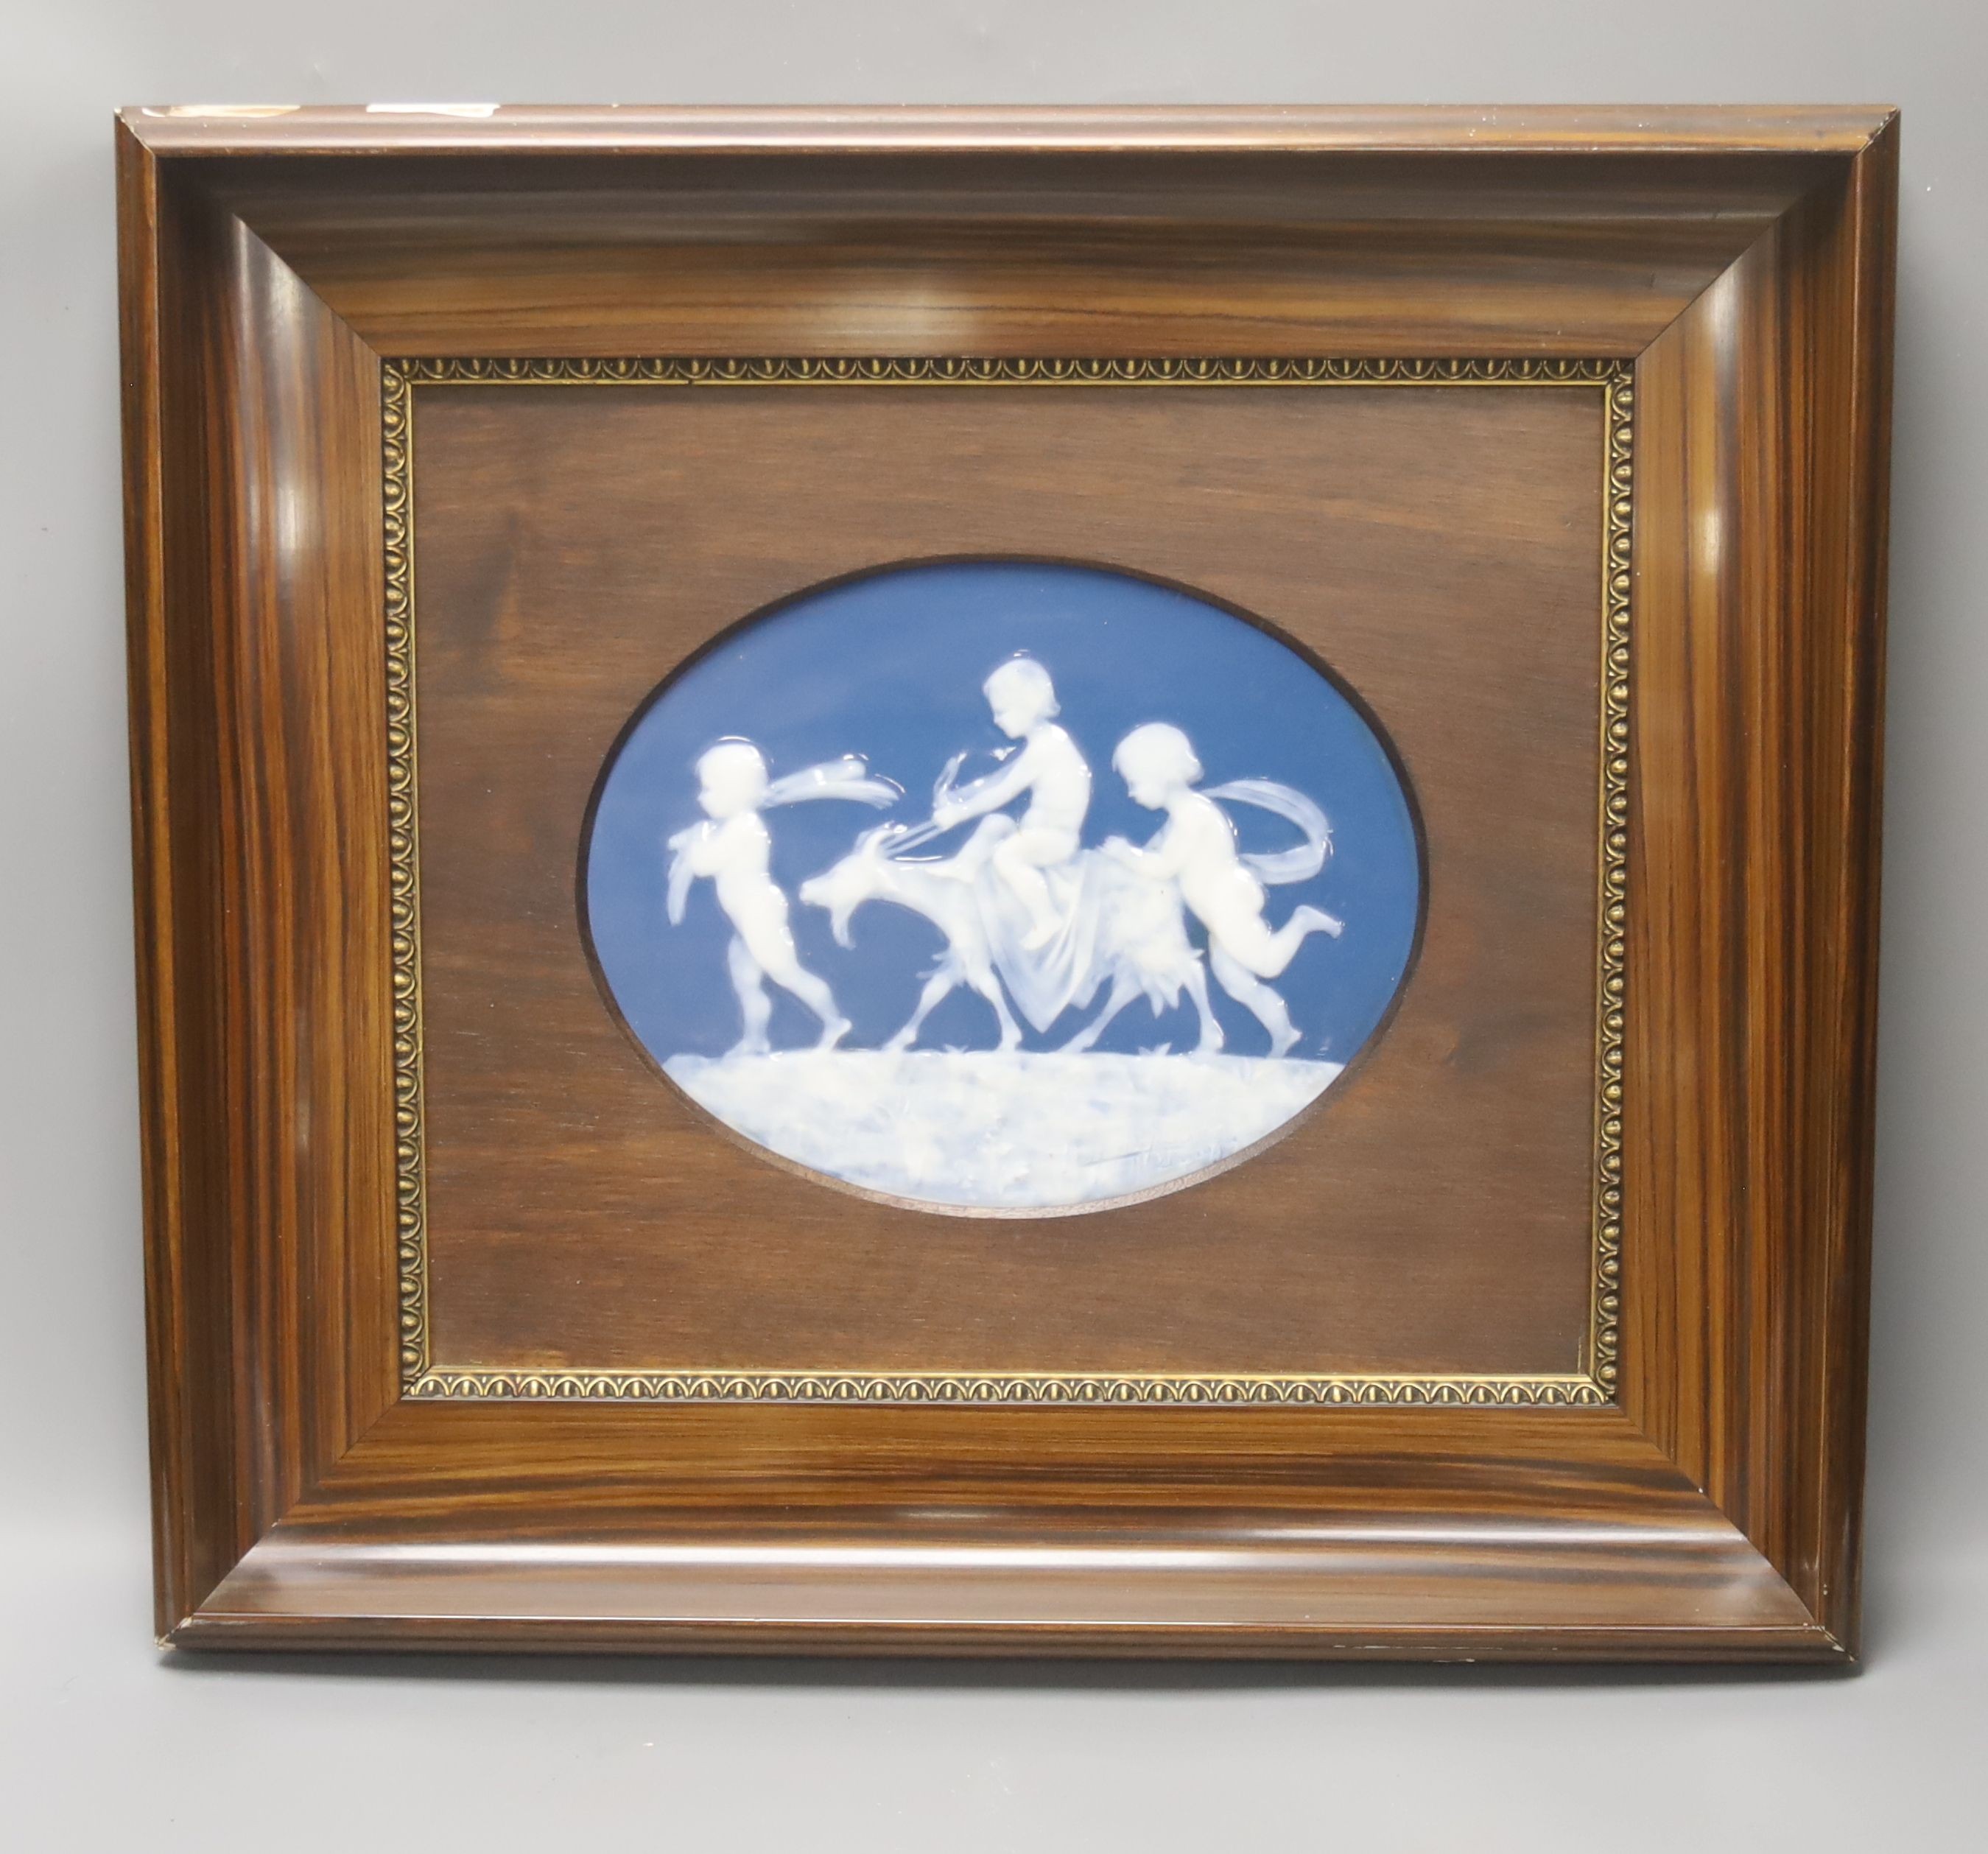 An early 20th century Limoges pate sur pate oval plaque, 18.5x 23.5cm, framed Frame external - 43x49cm